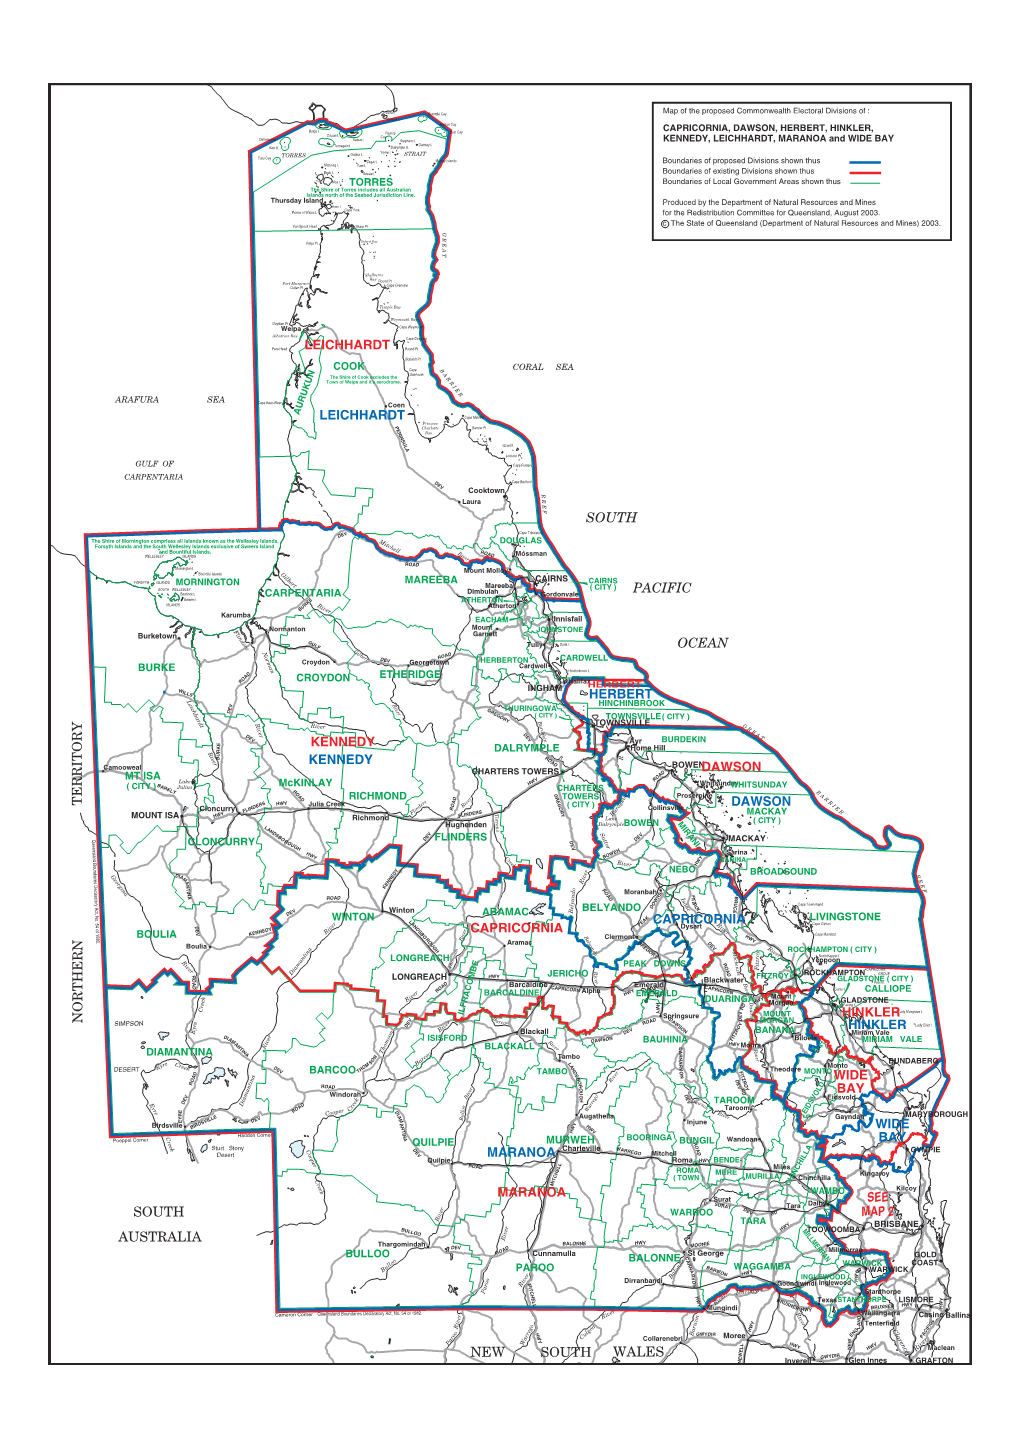 Proposed Divisions of Capricornia, Dawson, Herbert, Hinkler, Kennedy, Leichhardt, Maranoa and Wide